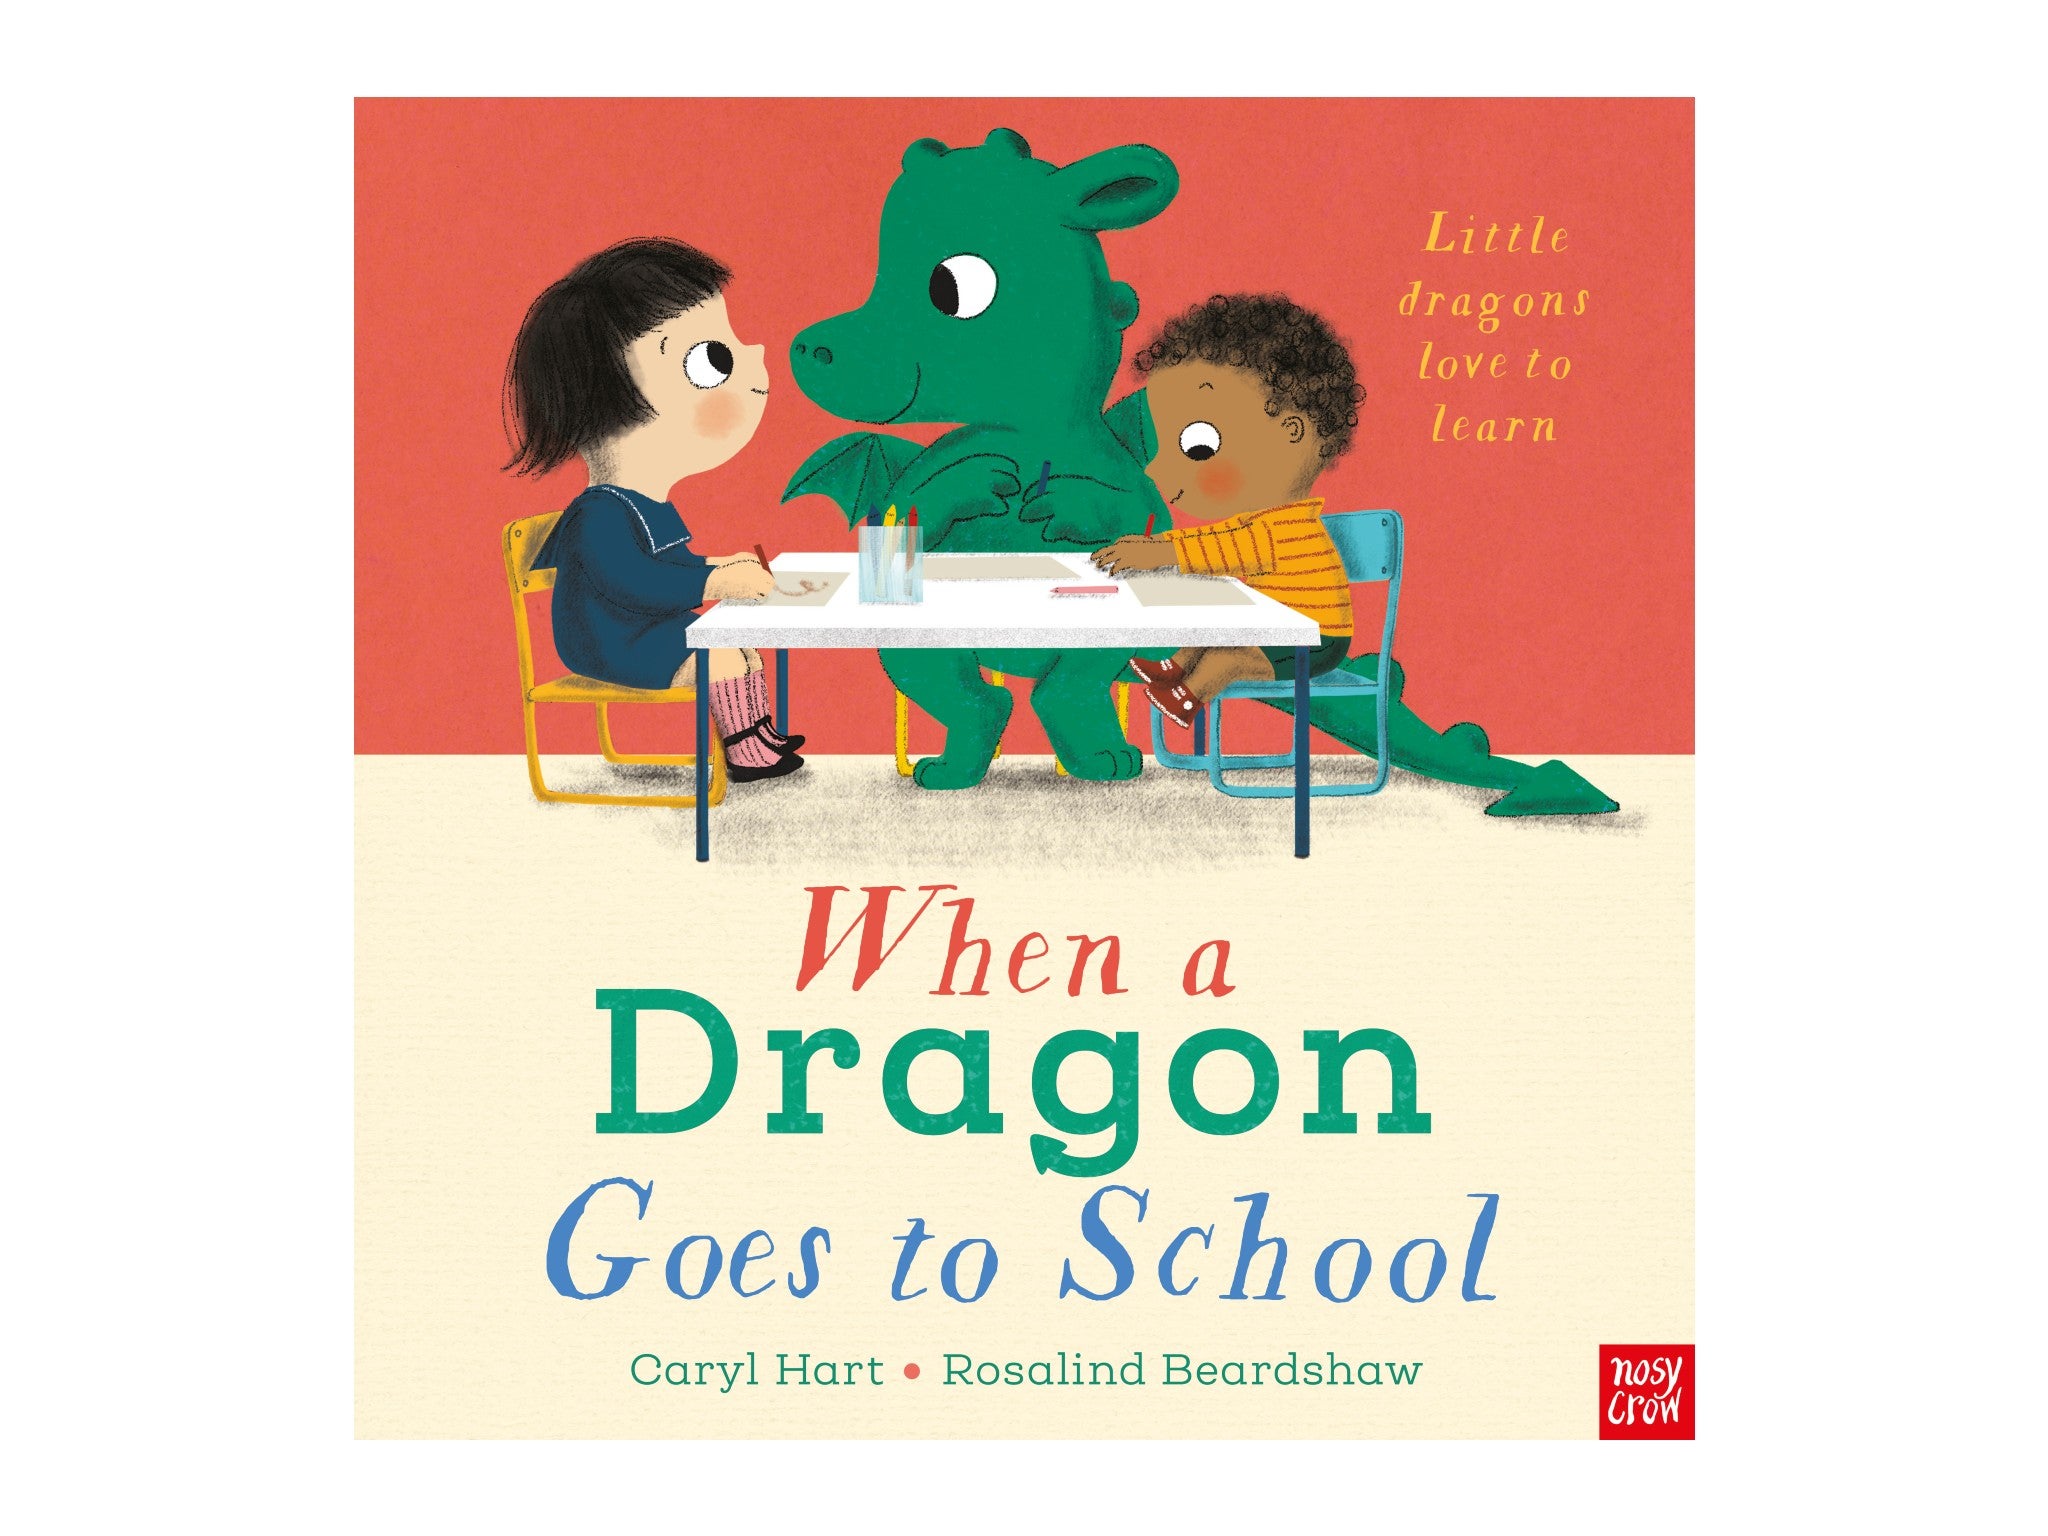 When a Dragon Goes to School, by Caryl Hart and Rosalind Beardshaw, published by Nosy Crow indybest.jpeg